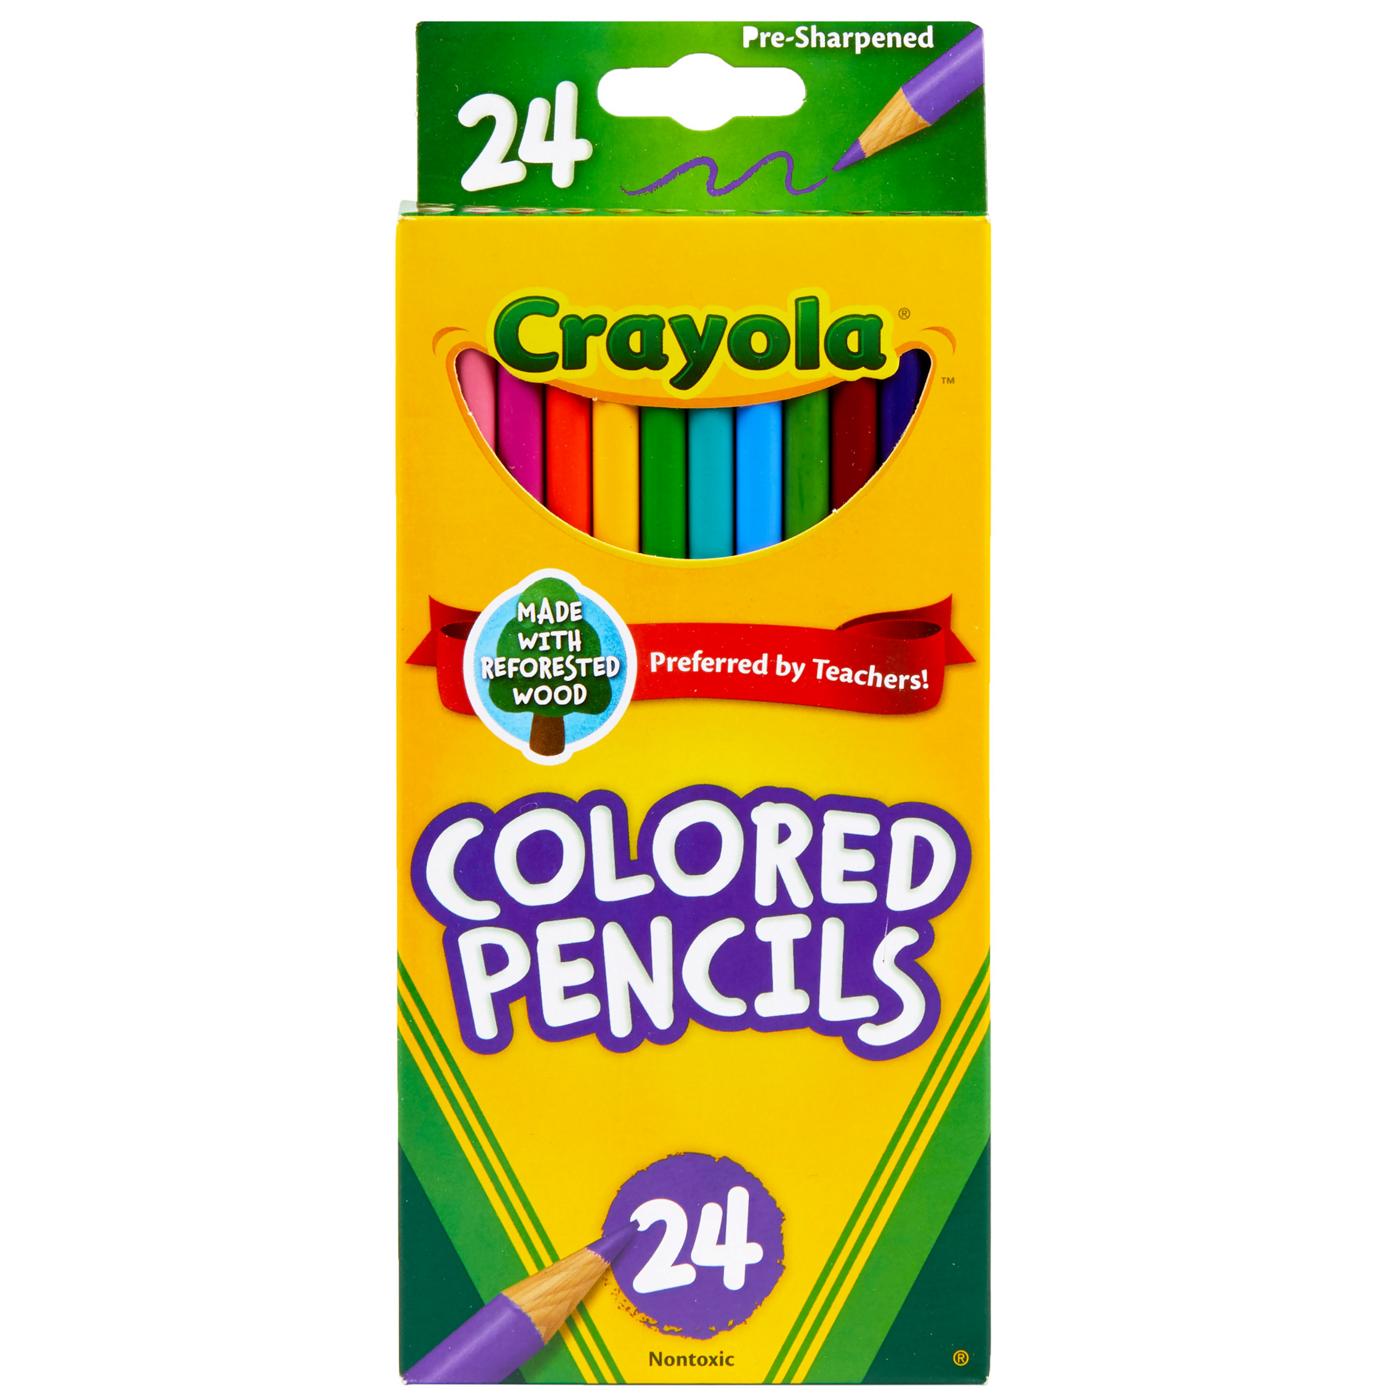 Crayola Pre-Sharpened Colored Pencils; image 1 of 2